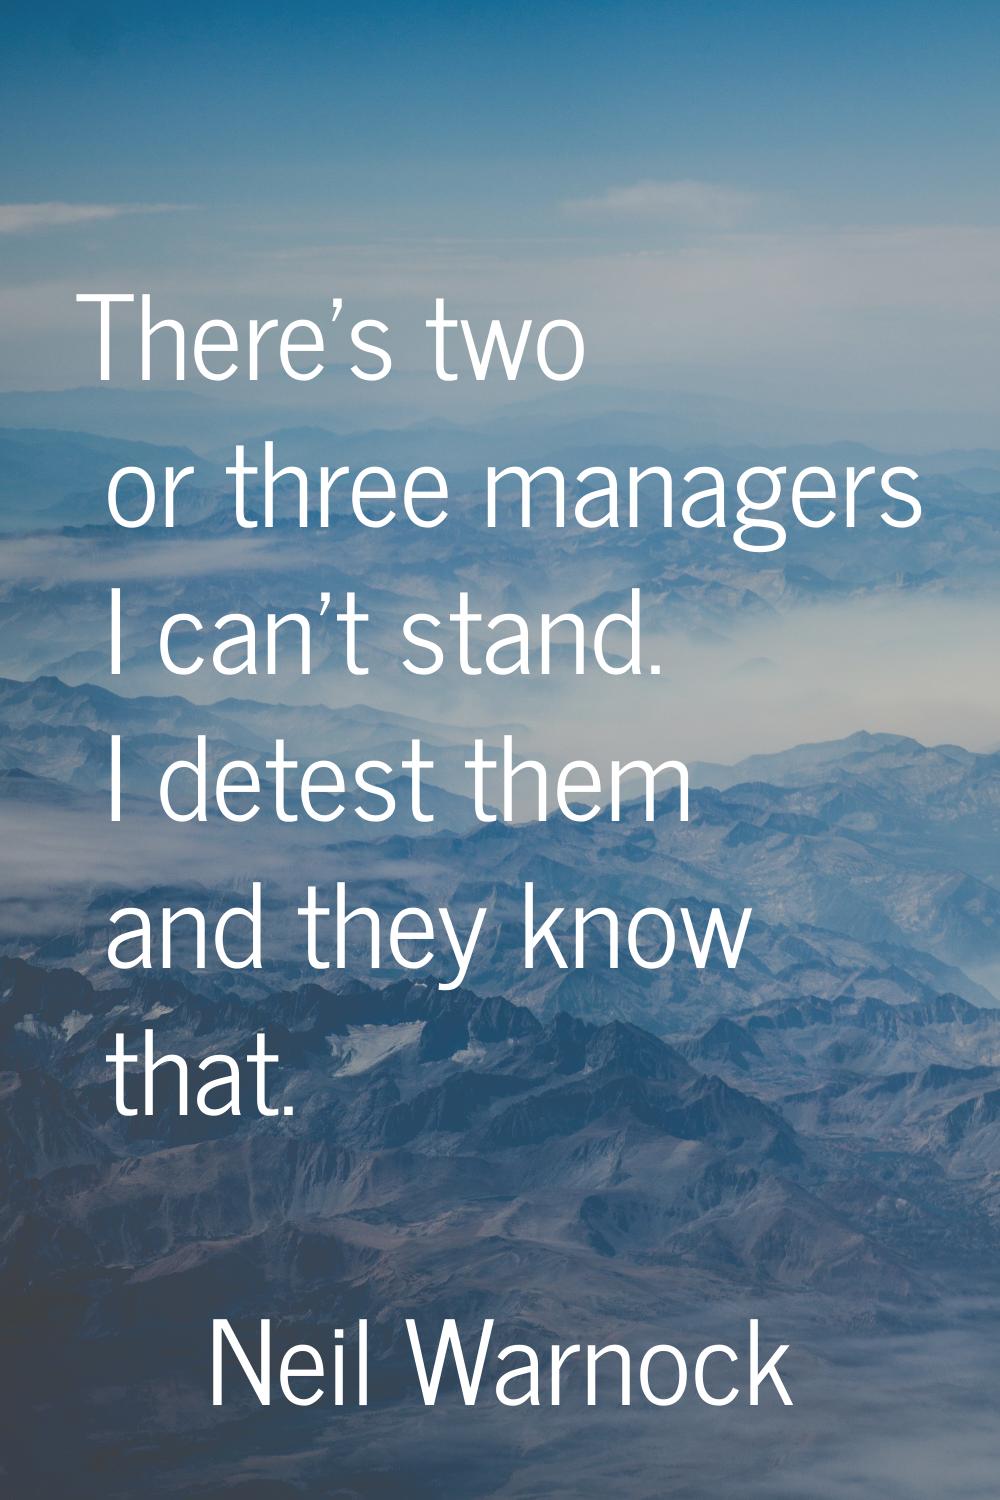 There's two or three managers I can't stand. I detest them and they know that.